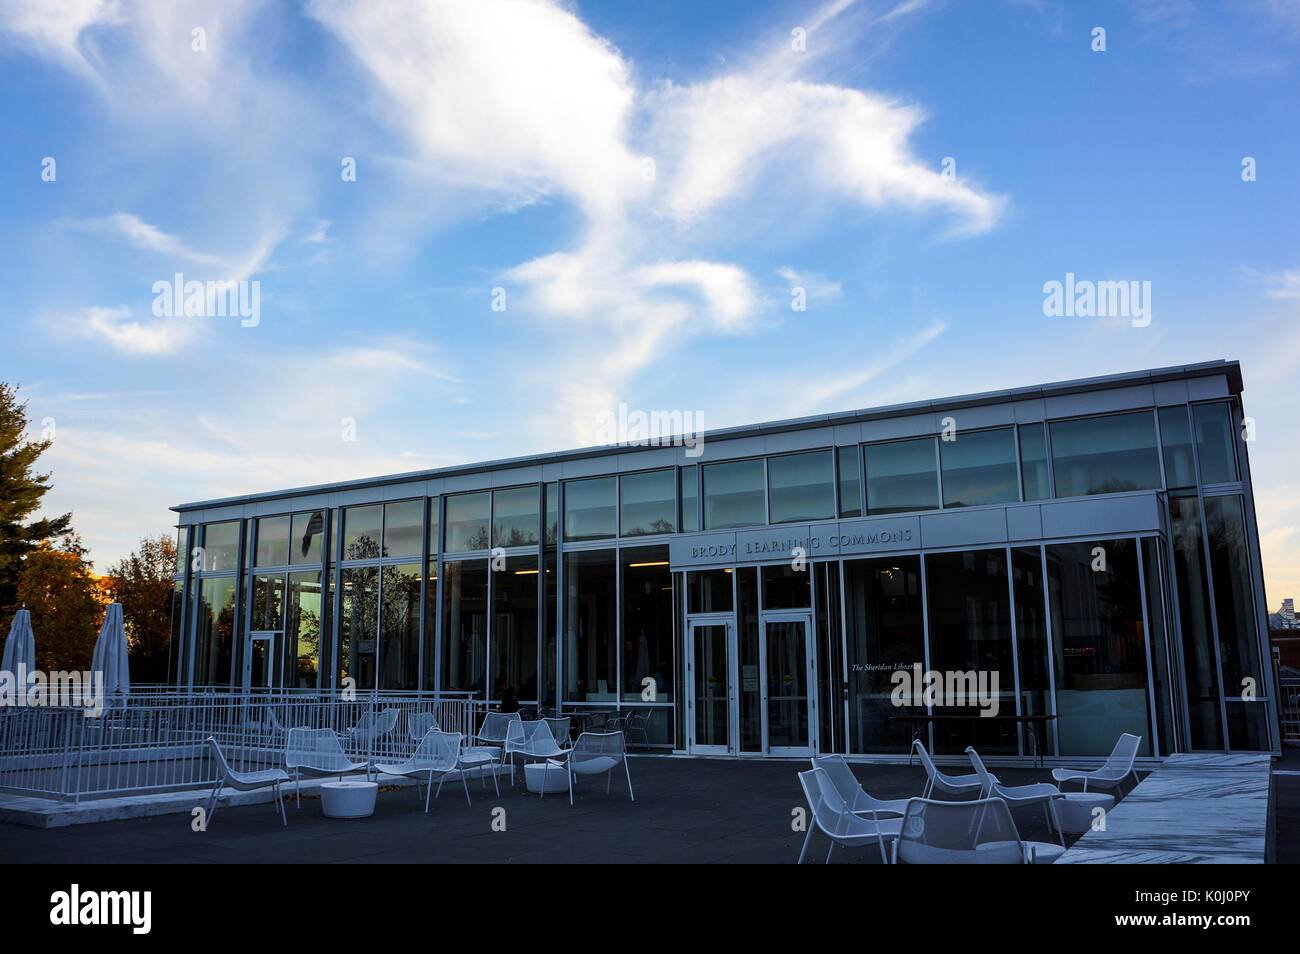 A shot of the patio, seating area, and cafe entrance to the Brody Learning Commons, a library and study space on the Homewood campus of the Johns Hopkins University in Baltimore, Maryland, 2015. Courtesy Eric Chen. Stock Photo